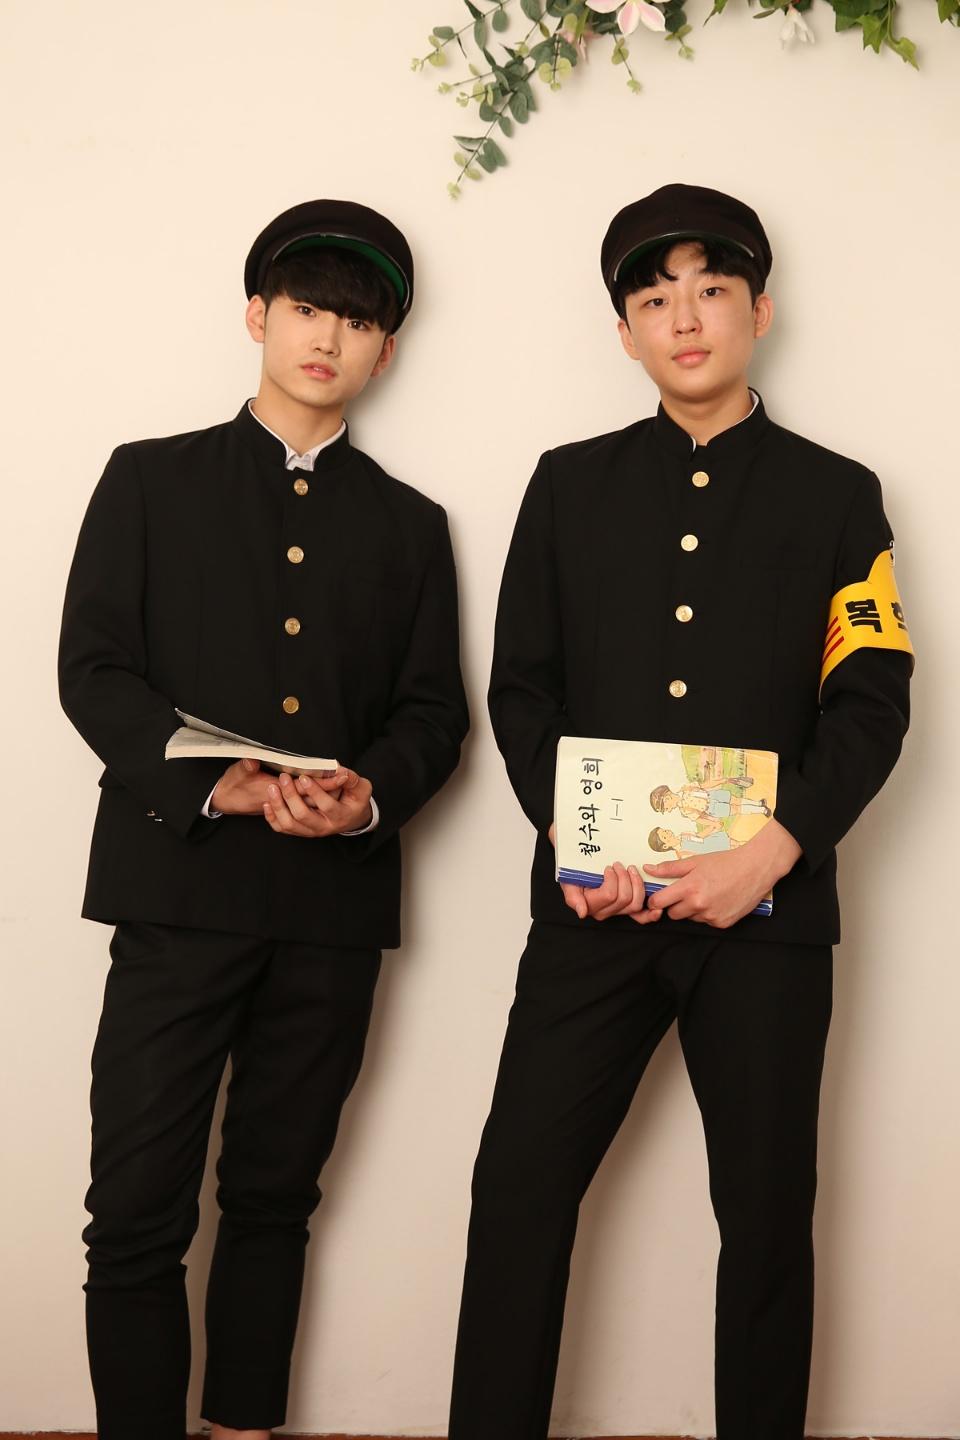 Two people. in school uniforms stand side by side with gestures.